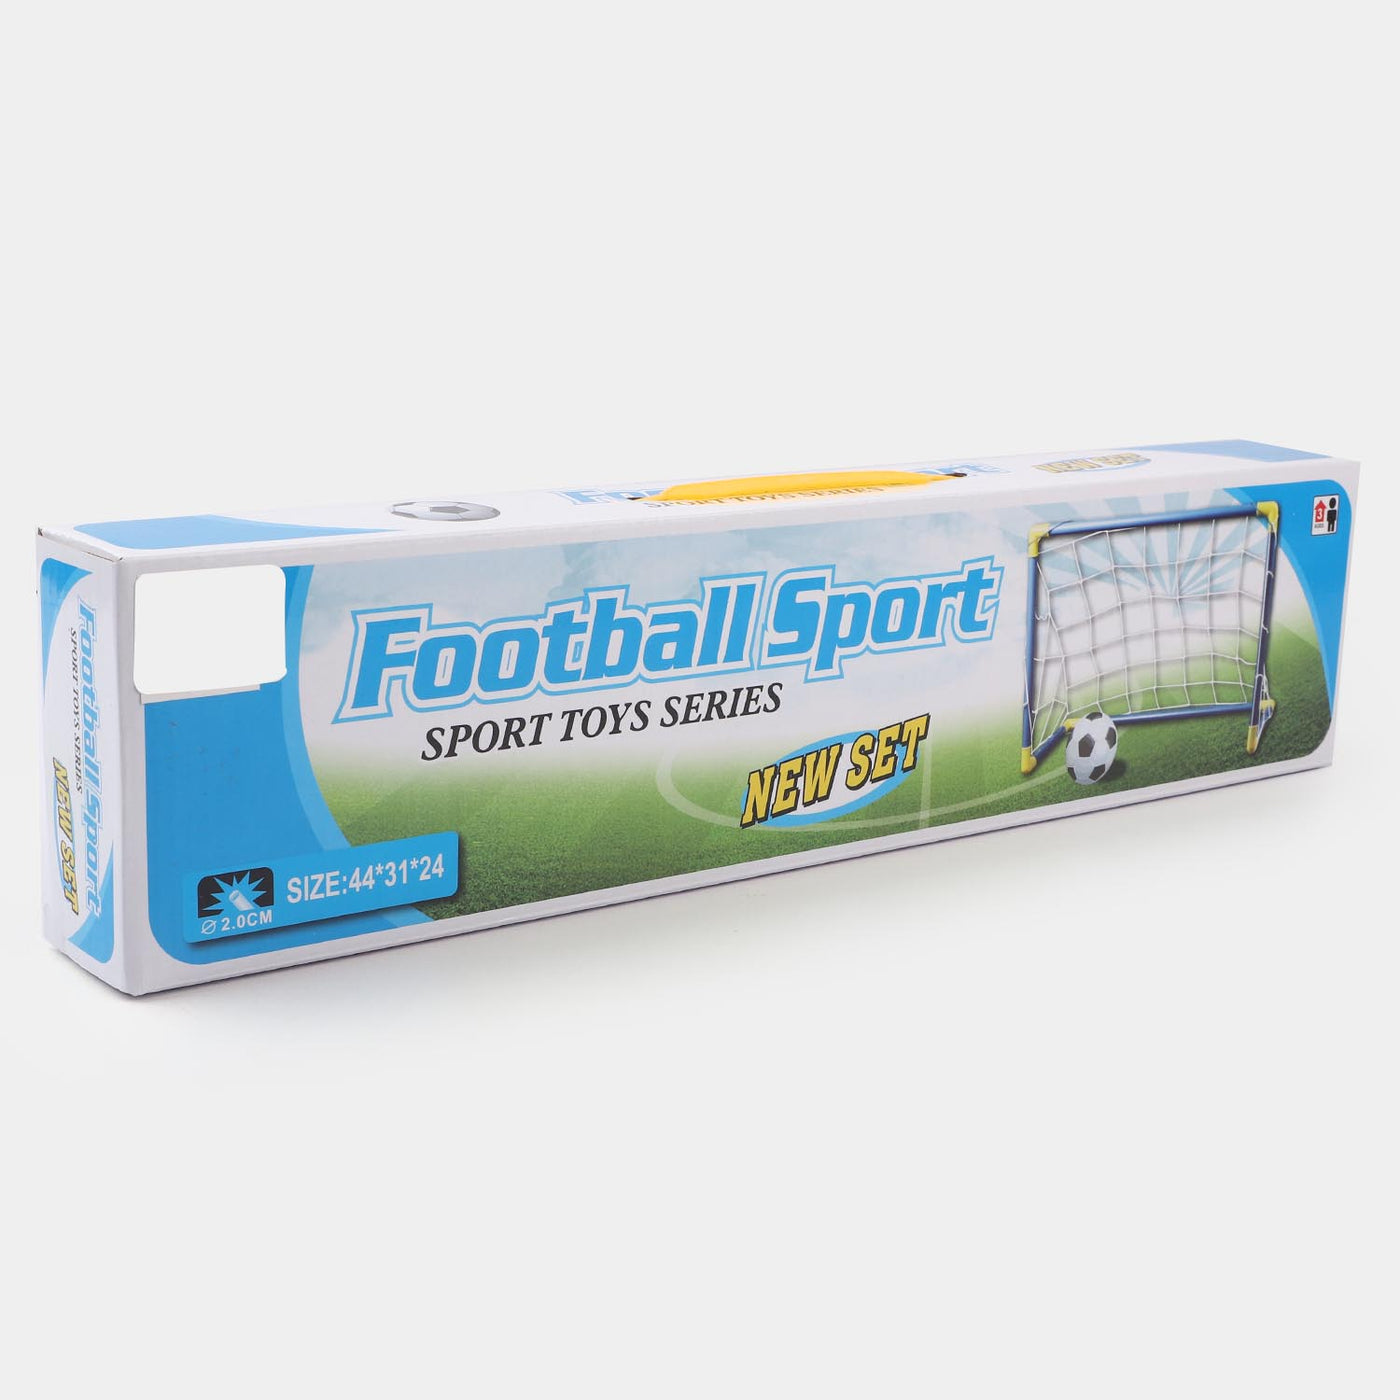 Football player set our toy gate, Ball, pump